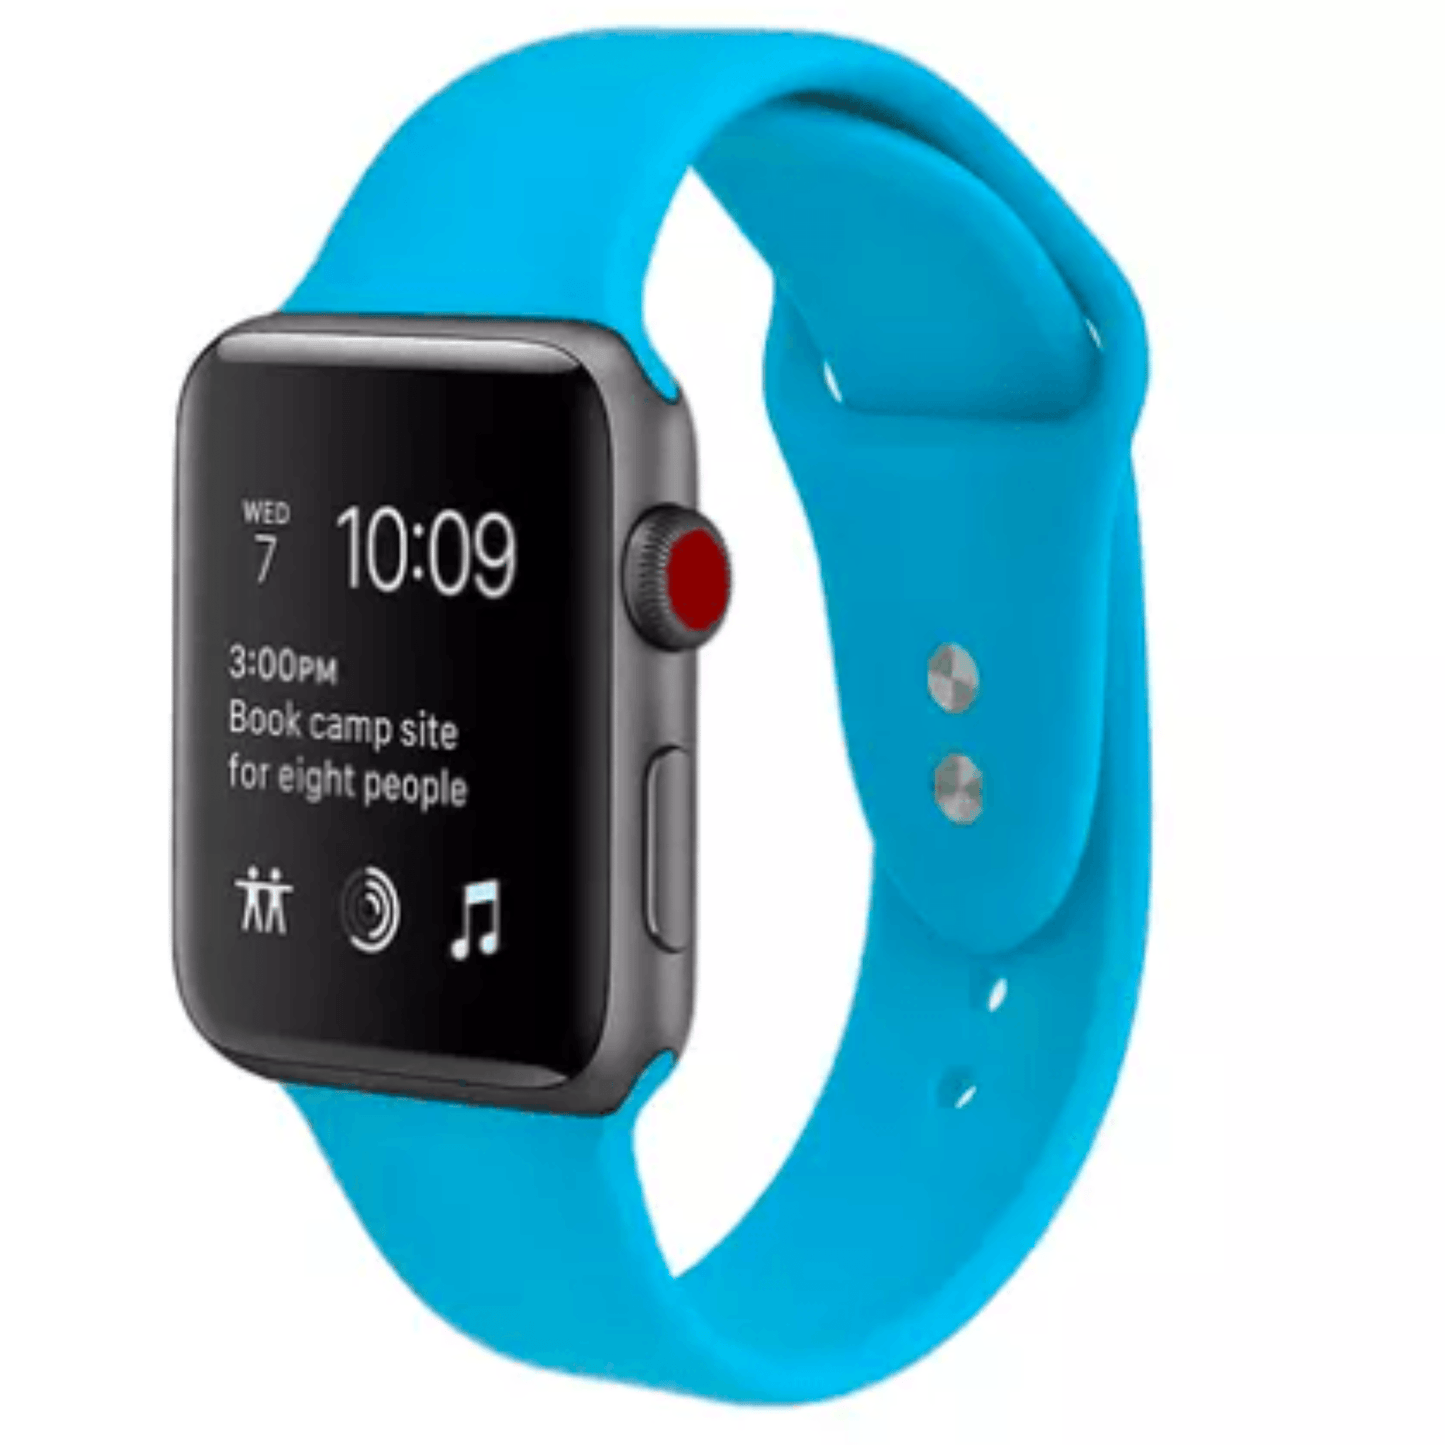 Silicone Sport Replacement Band for Apple Watch Blue Apple Watch Band Elements Watches